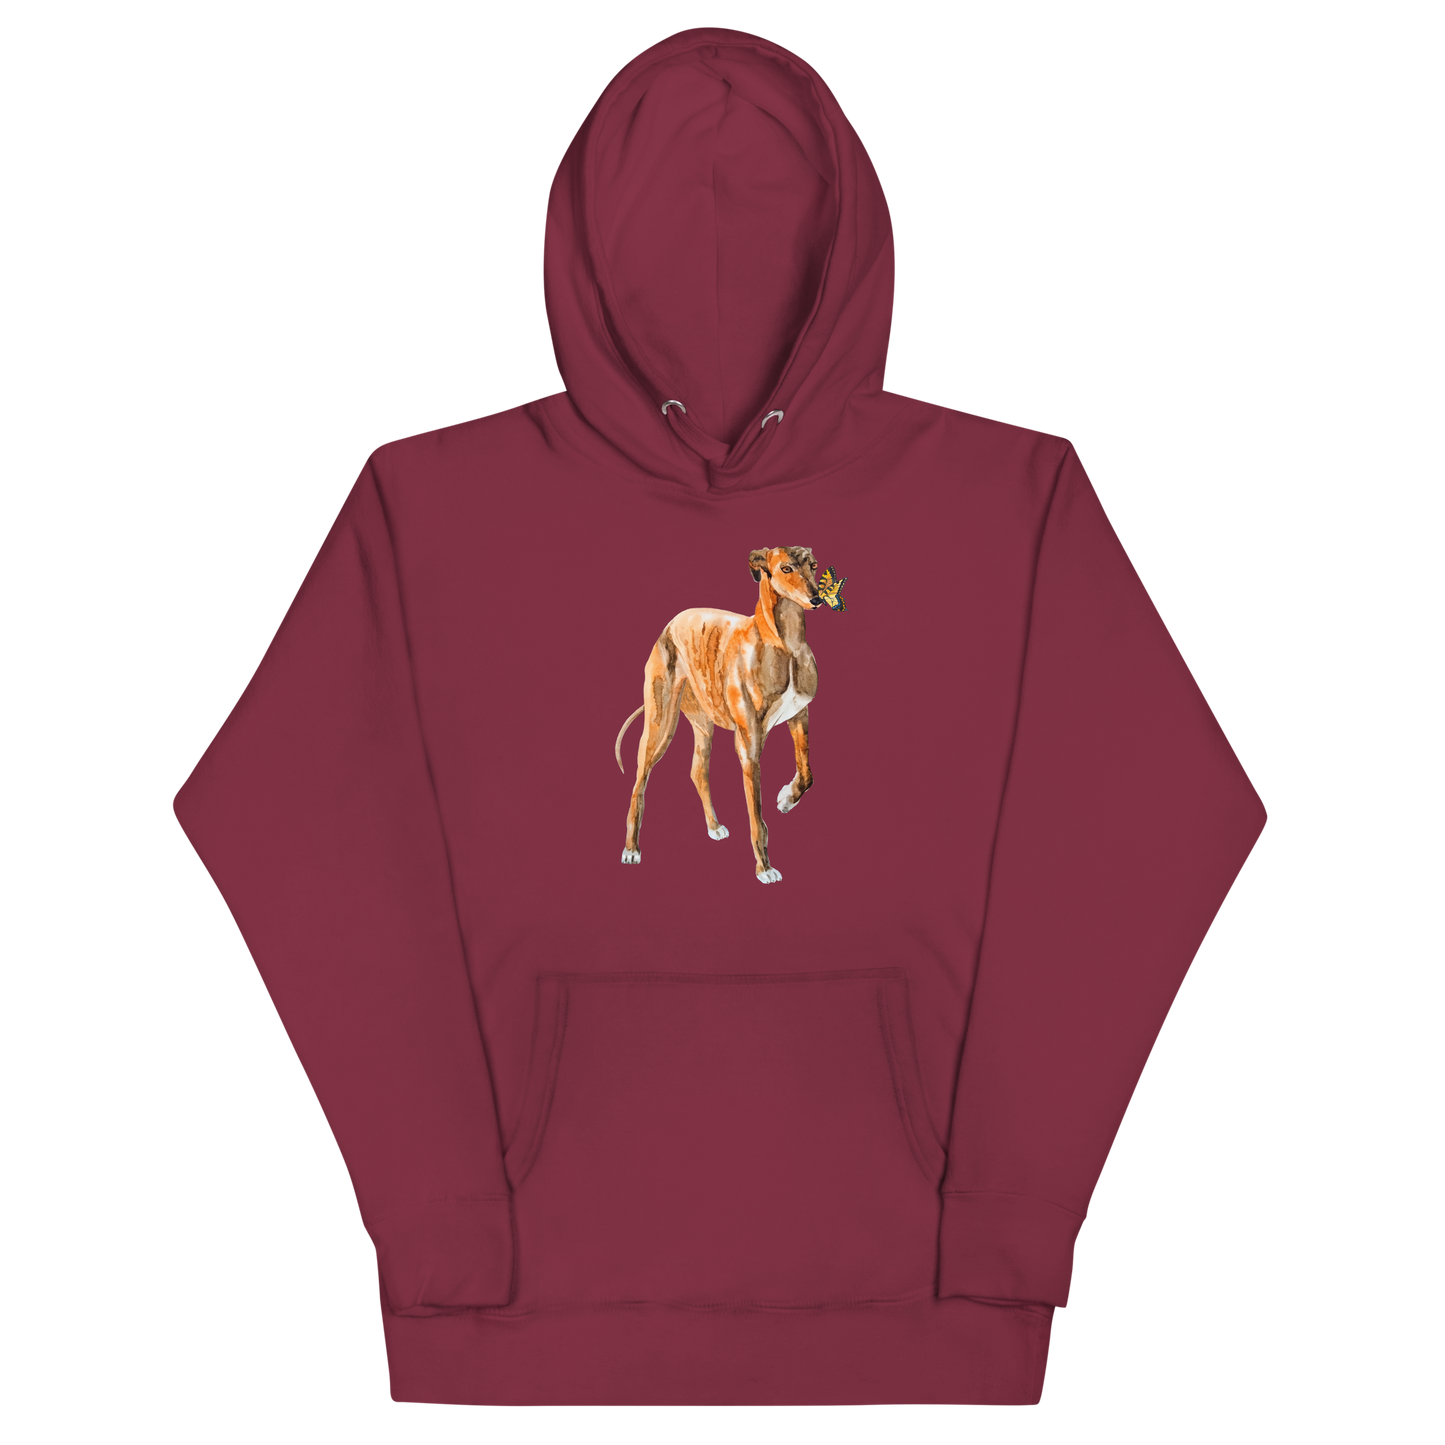 Maroon Premium Greyhound Hoodie featuring an adorable Greyhound And Butterfly graphic on the chest - Cute Graphic Greyhound Hoodies - Boozy Fox